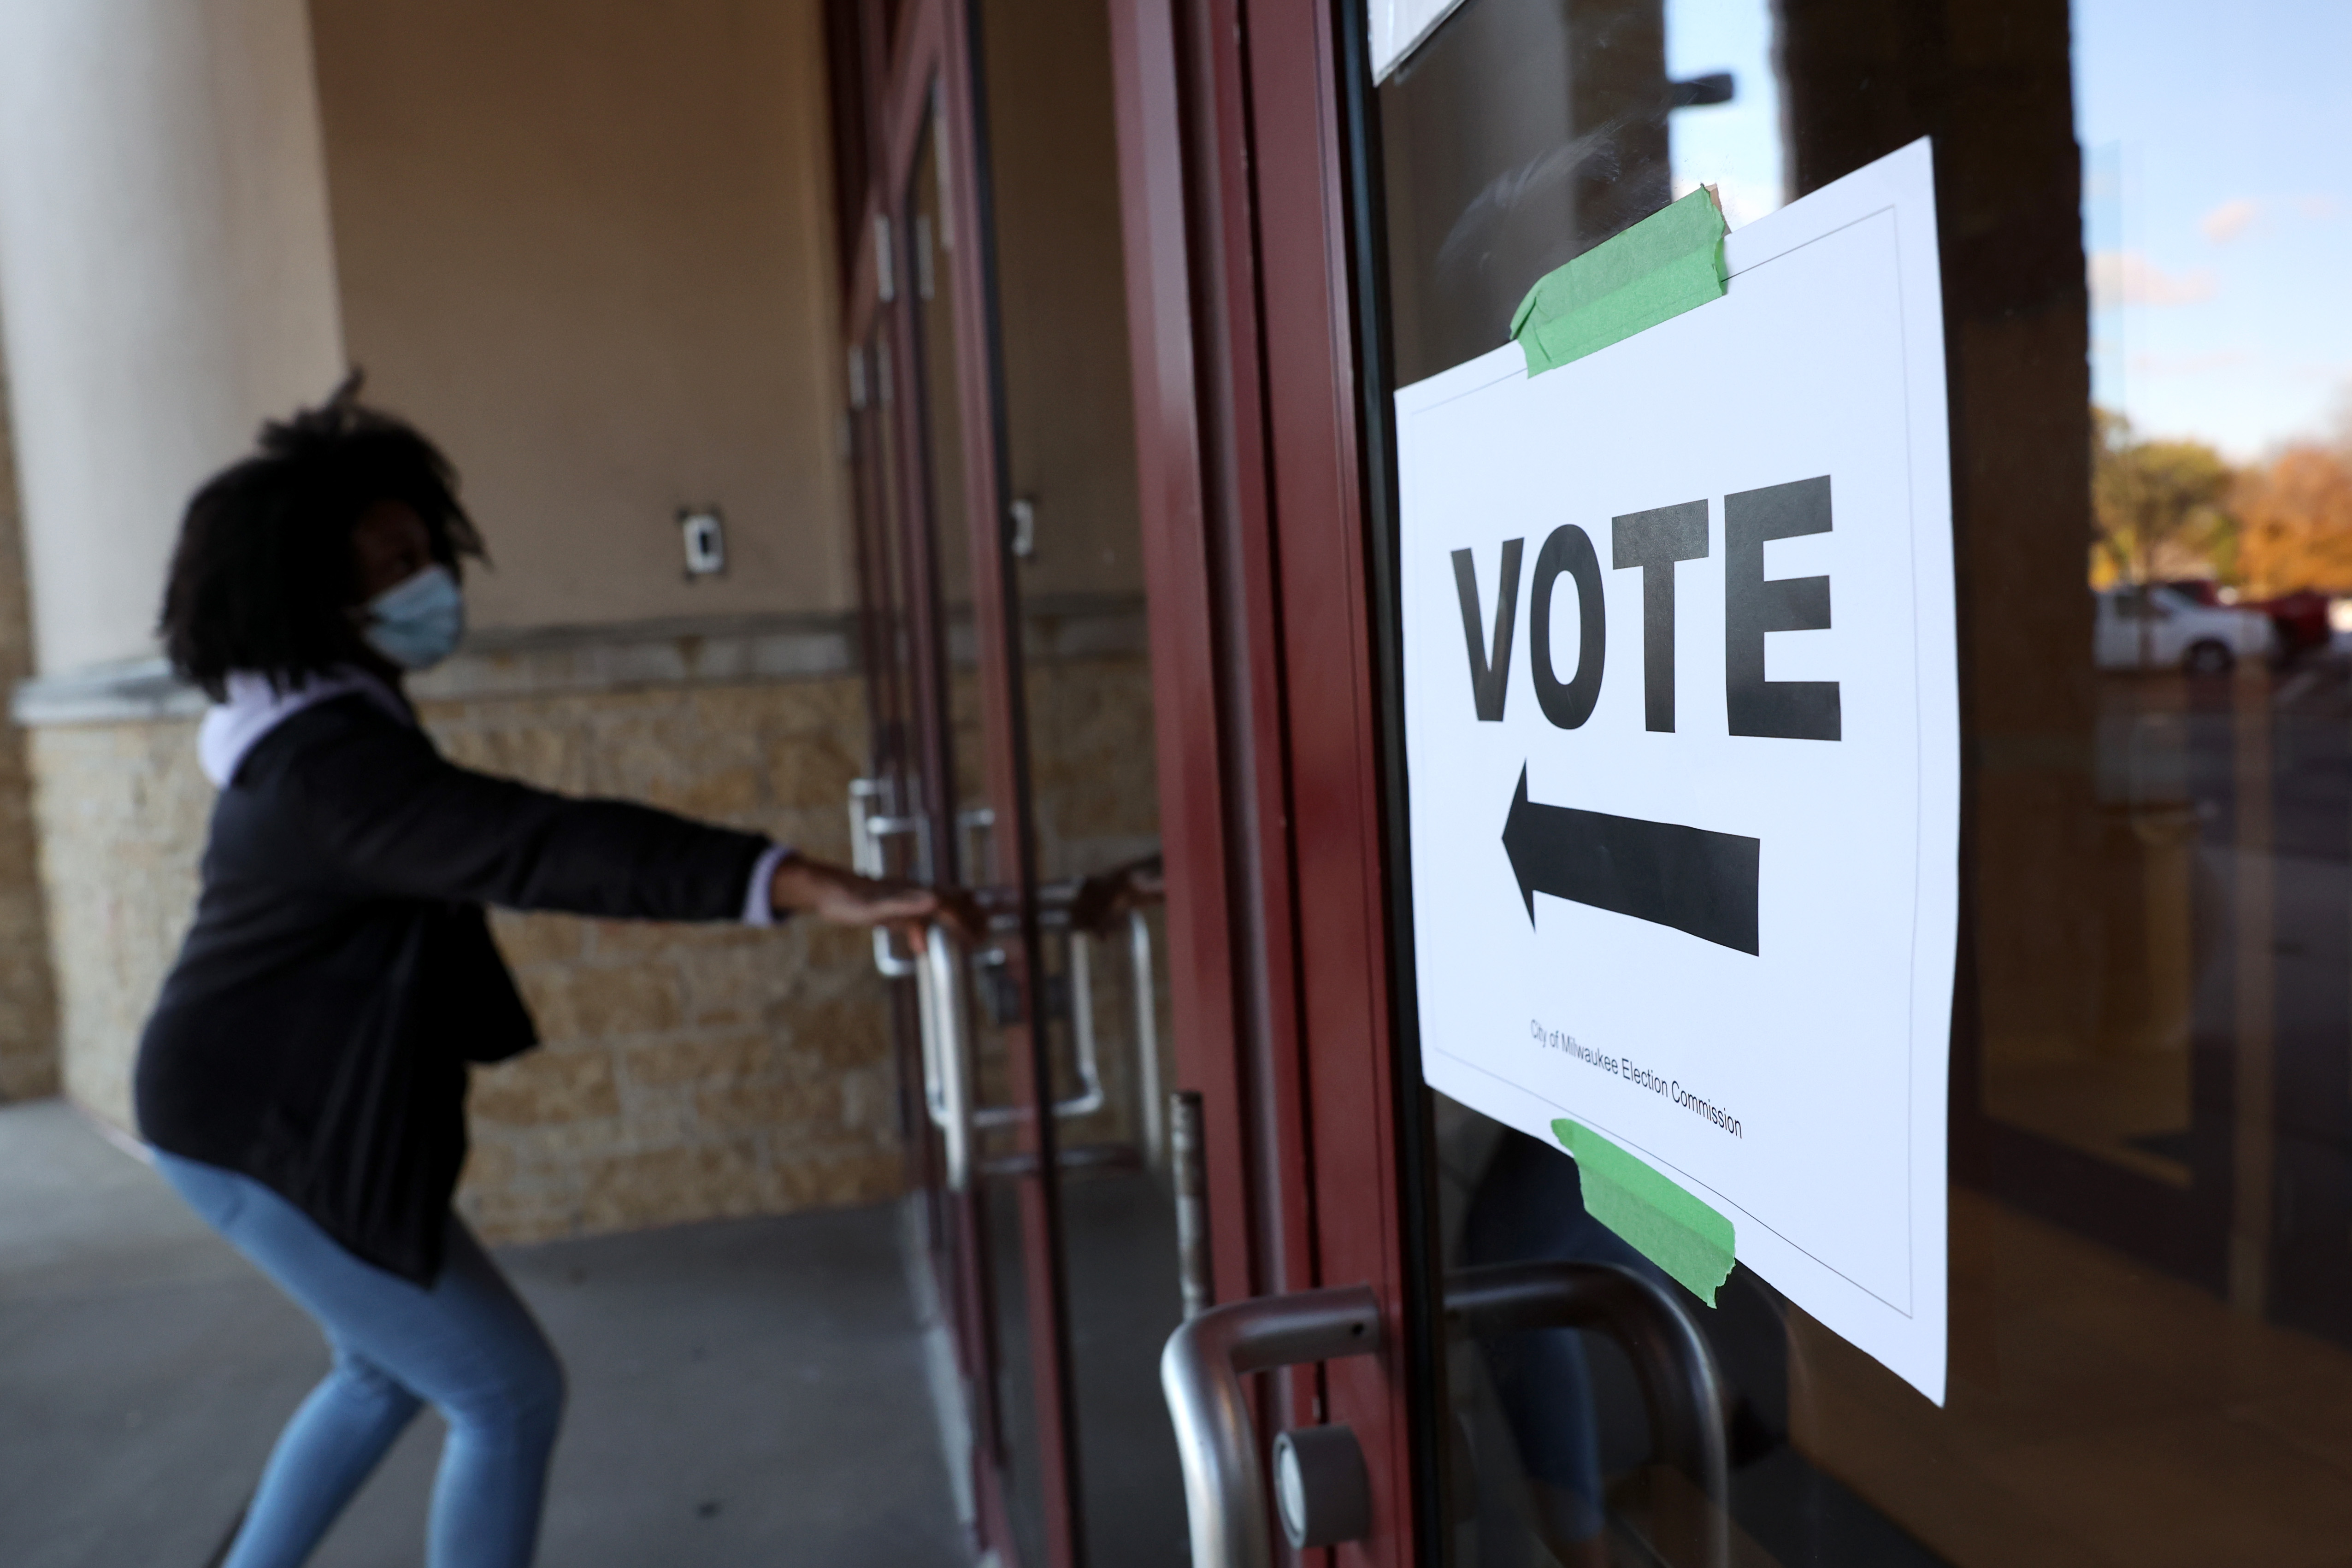 A person pulls open a door beside a sign that reads “vote” and has an arrow pointing left.